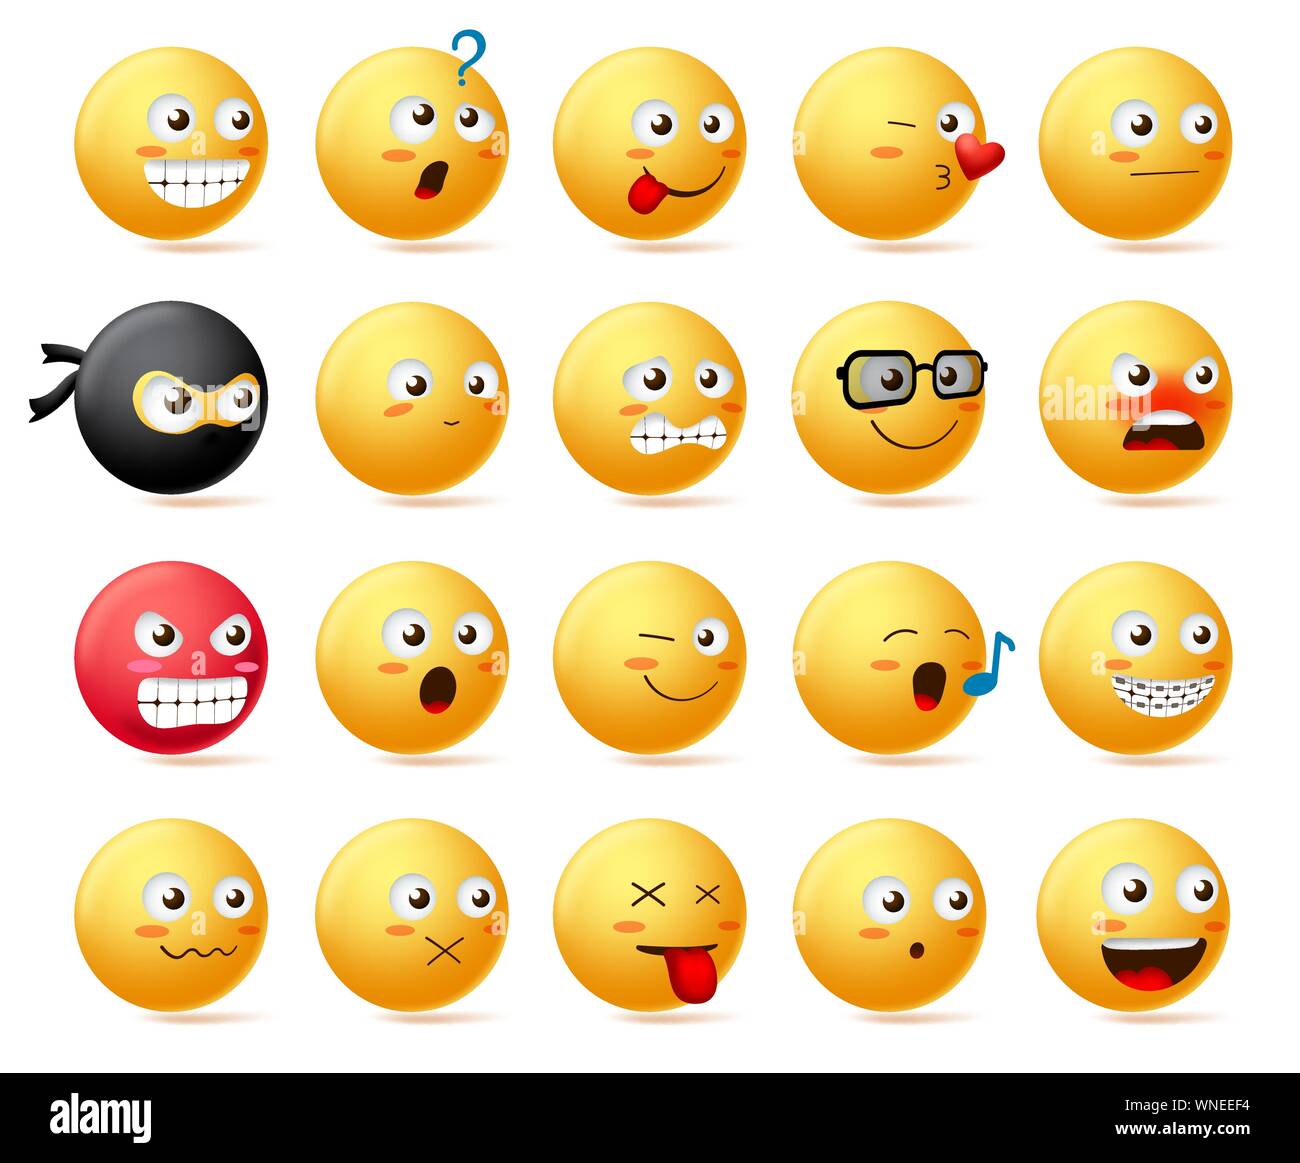 Smileys emoji faces vector character set. Smiley emoticon with yellow face in side view and cute facial expression like sad, scared, angry, happy. Stock Vector